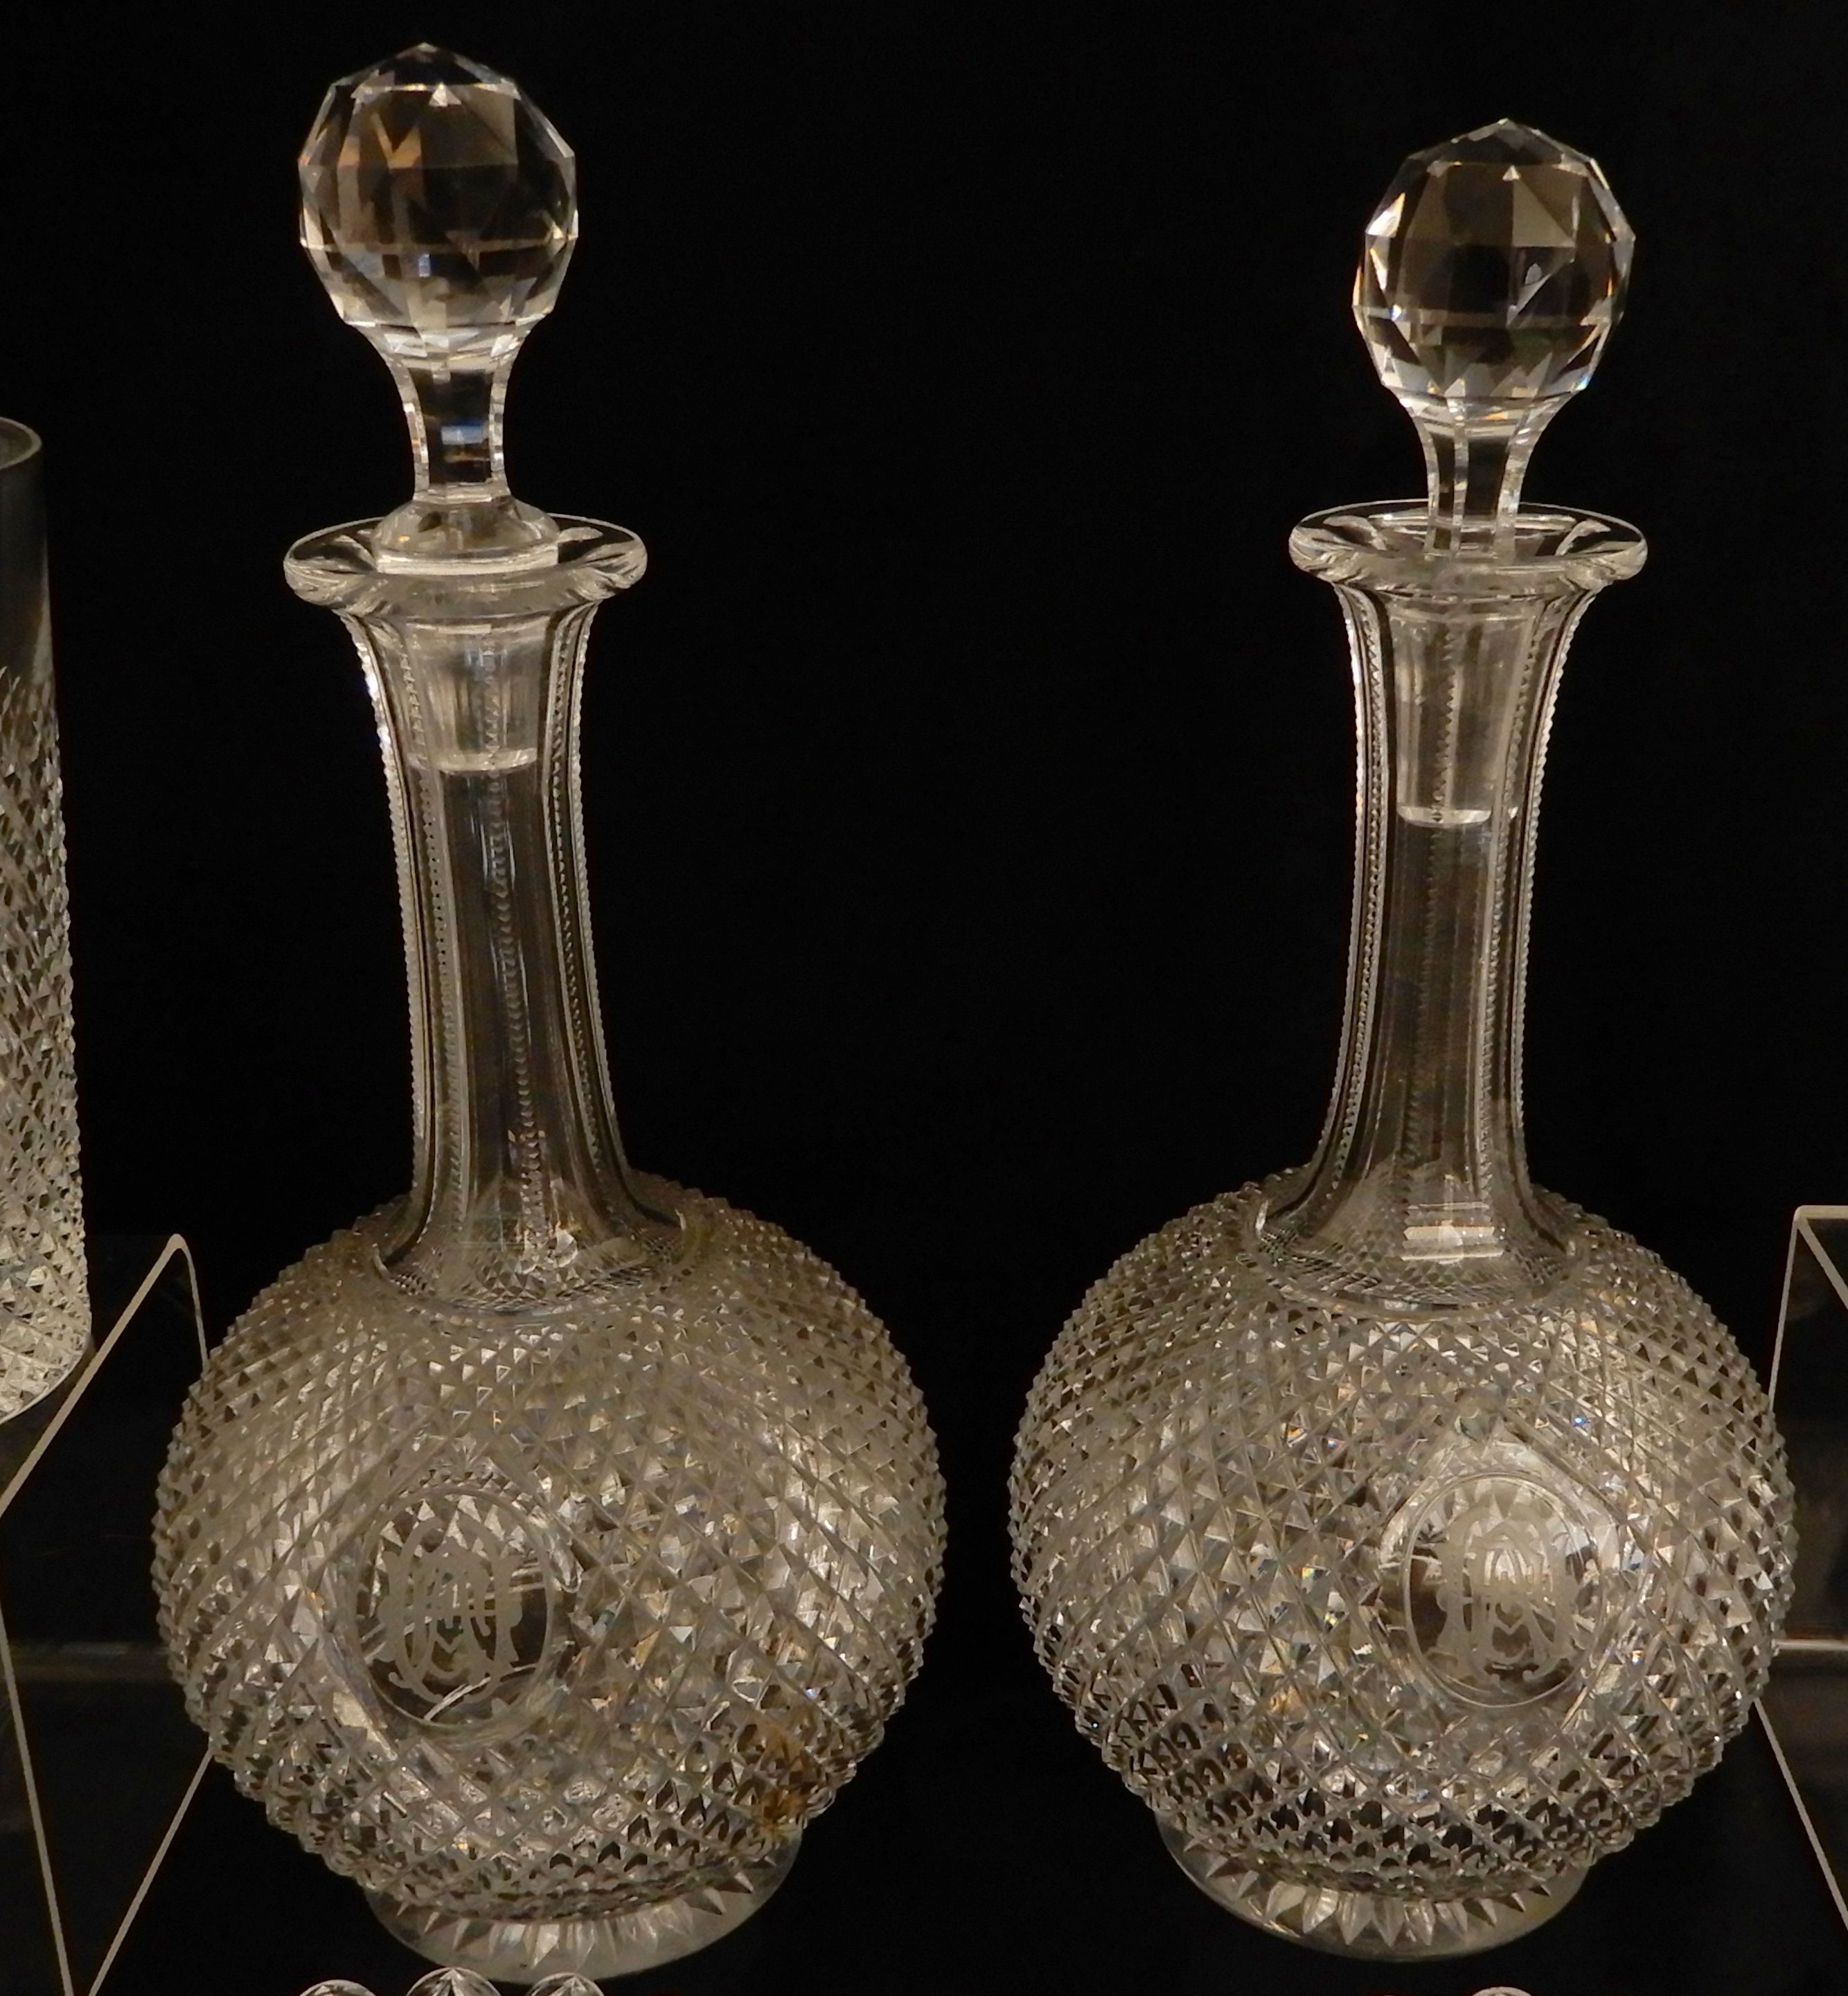 A SUITE OF LATE 19TH CENTURY DIAMOND CUT CRYSTAL comprising six large tumblers, 14.5cm high, fifteen - Image 13 of 24